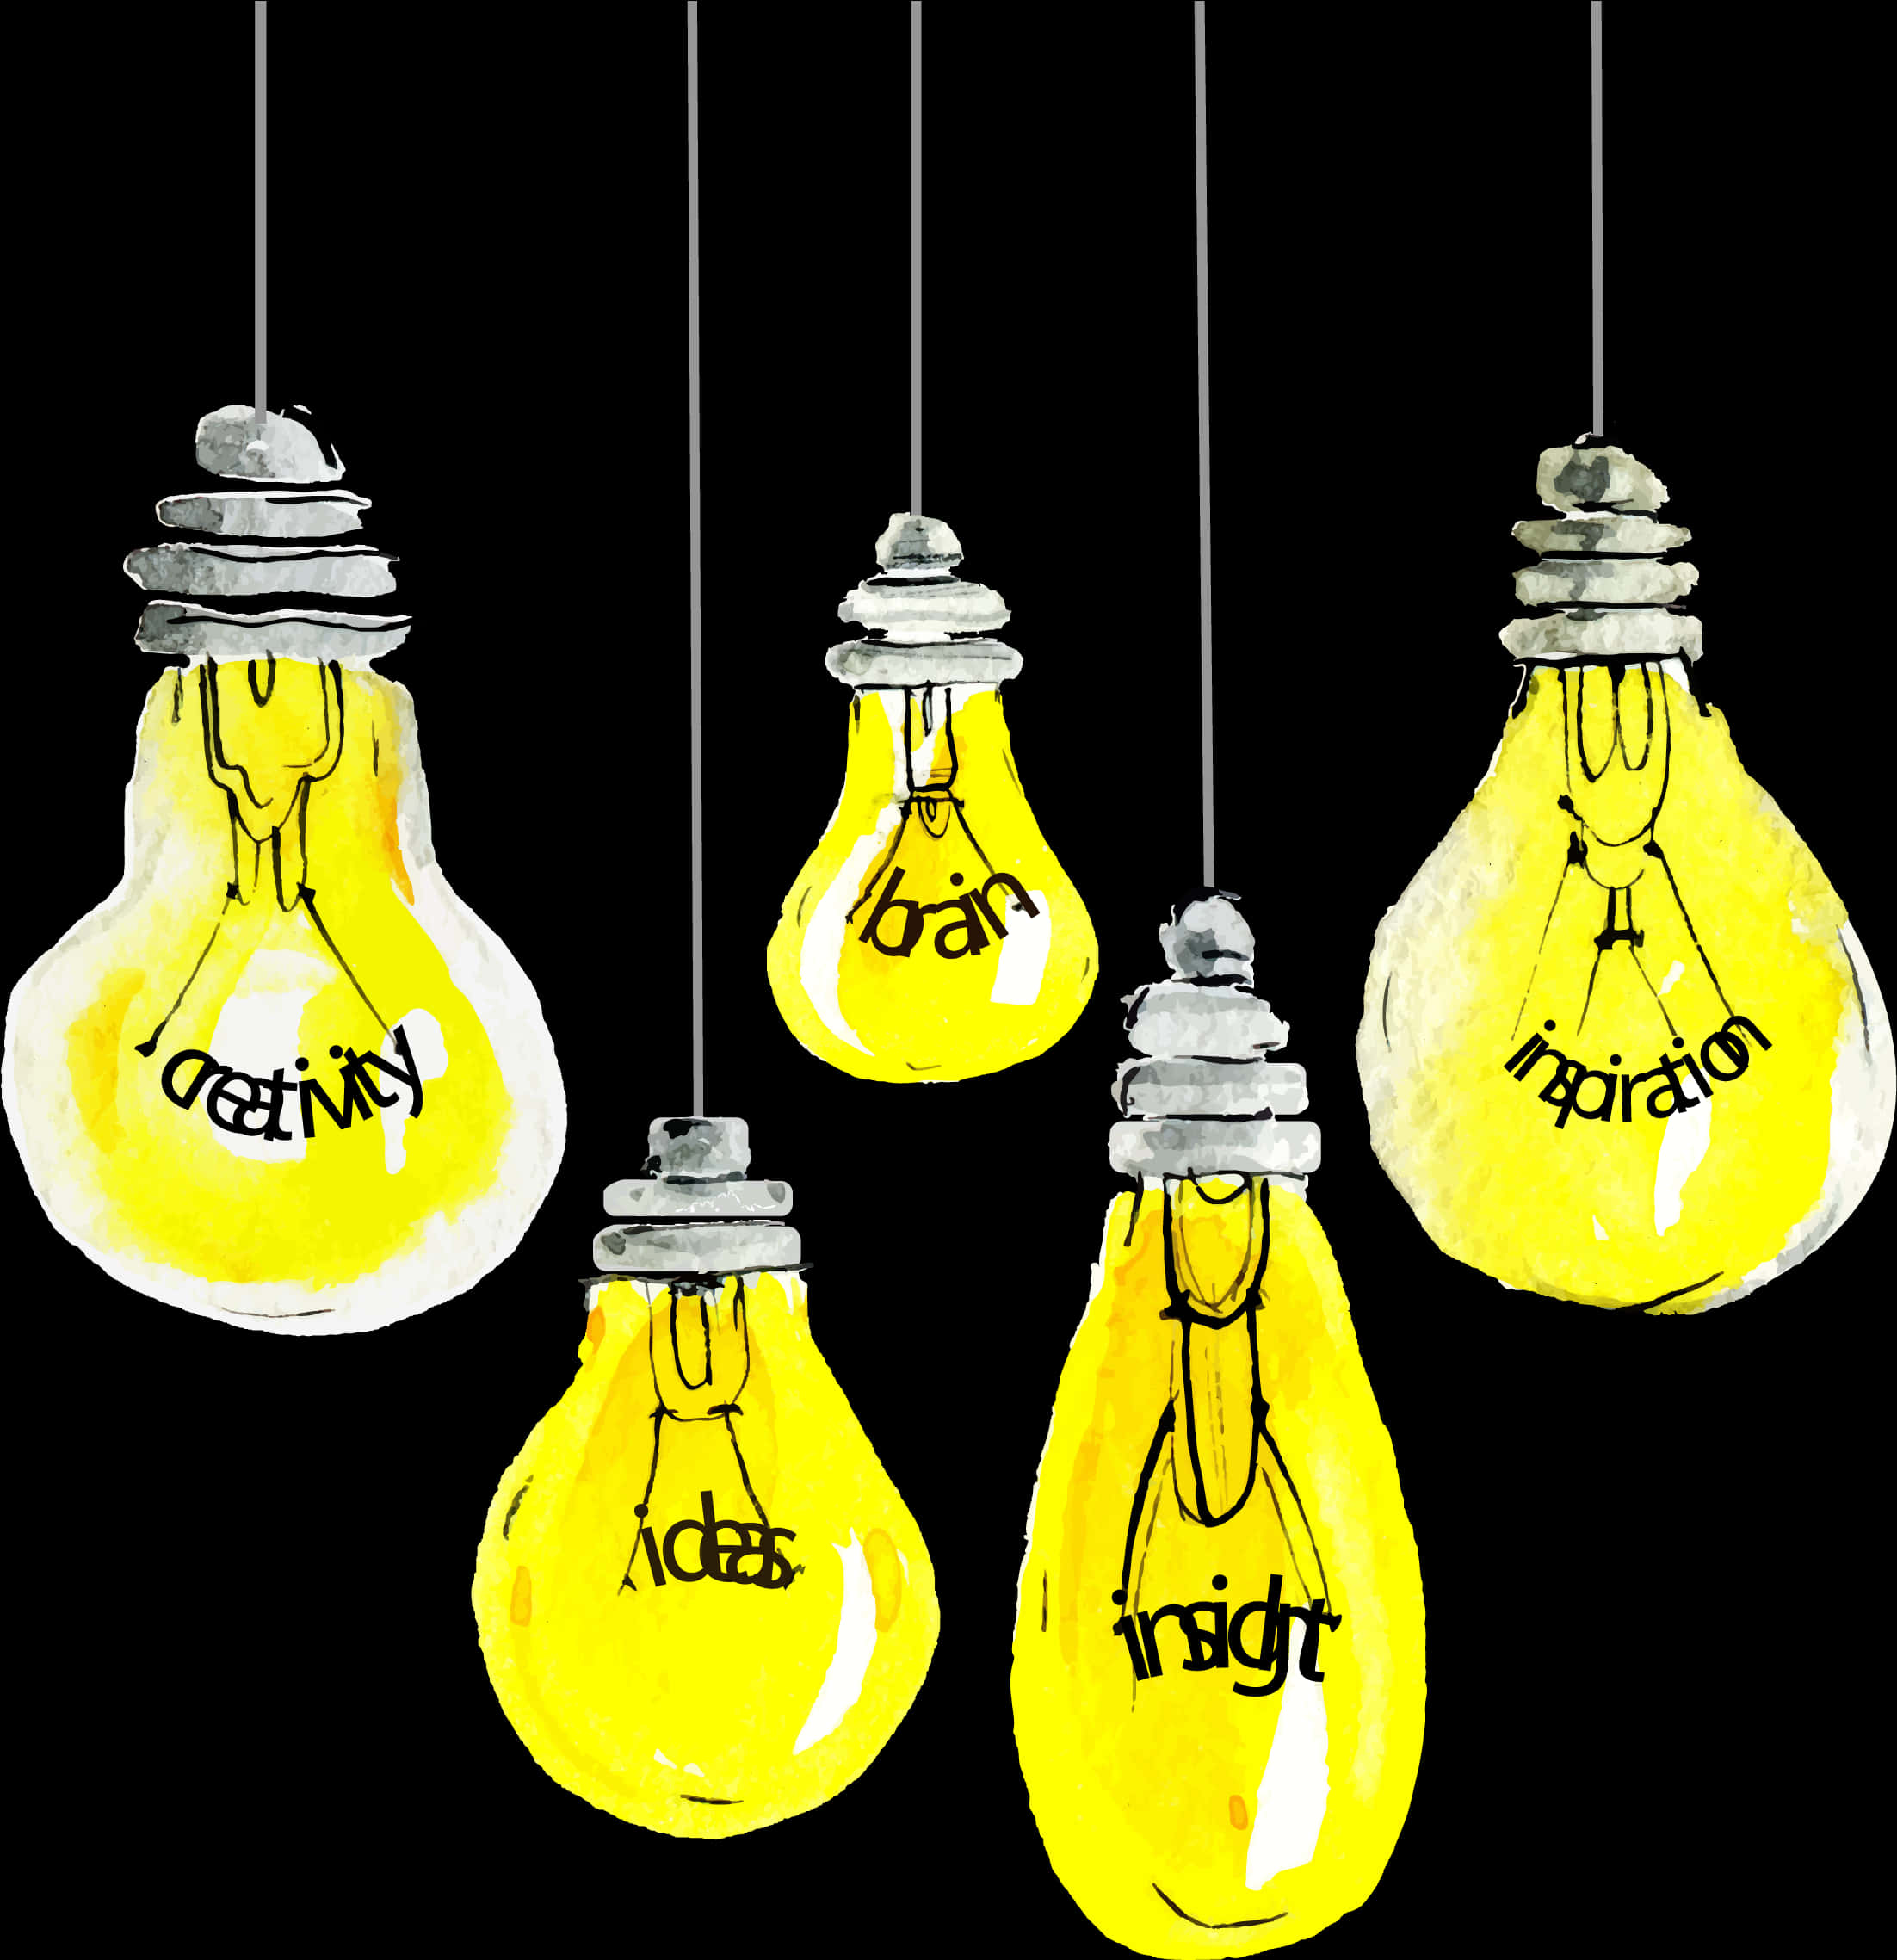 A Group Of Light Bulbs With Writing On Them